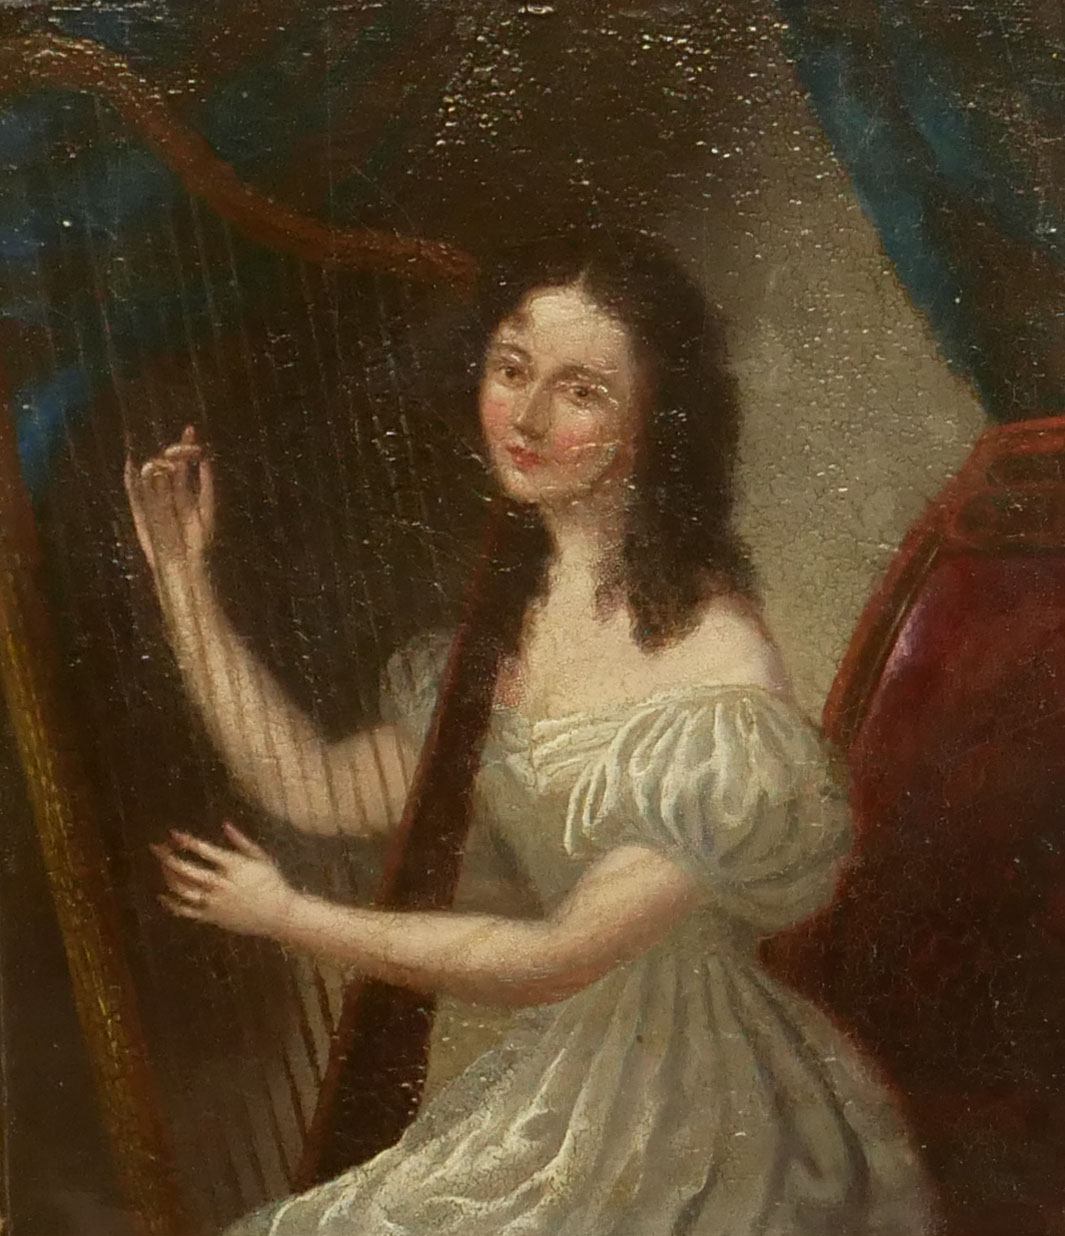 A 19TH CENTURY ENGLISH NAÏVE SCHOOL OIL ON PANEL Young woman playing the harp, unsigned, in a